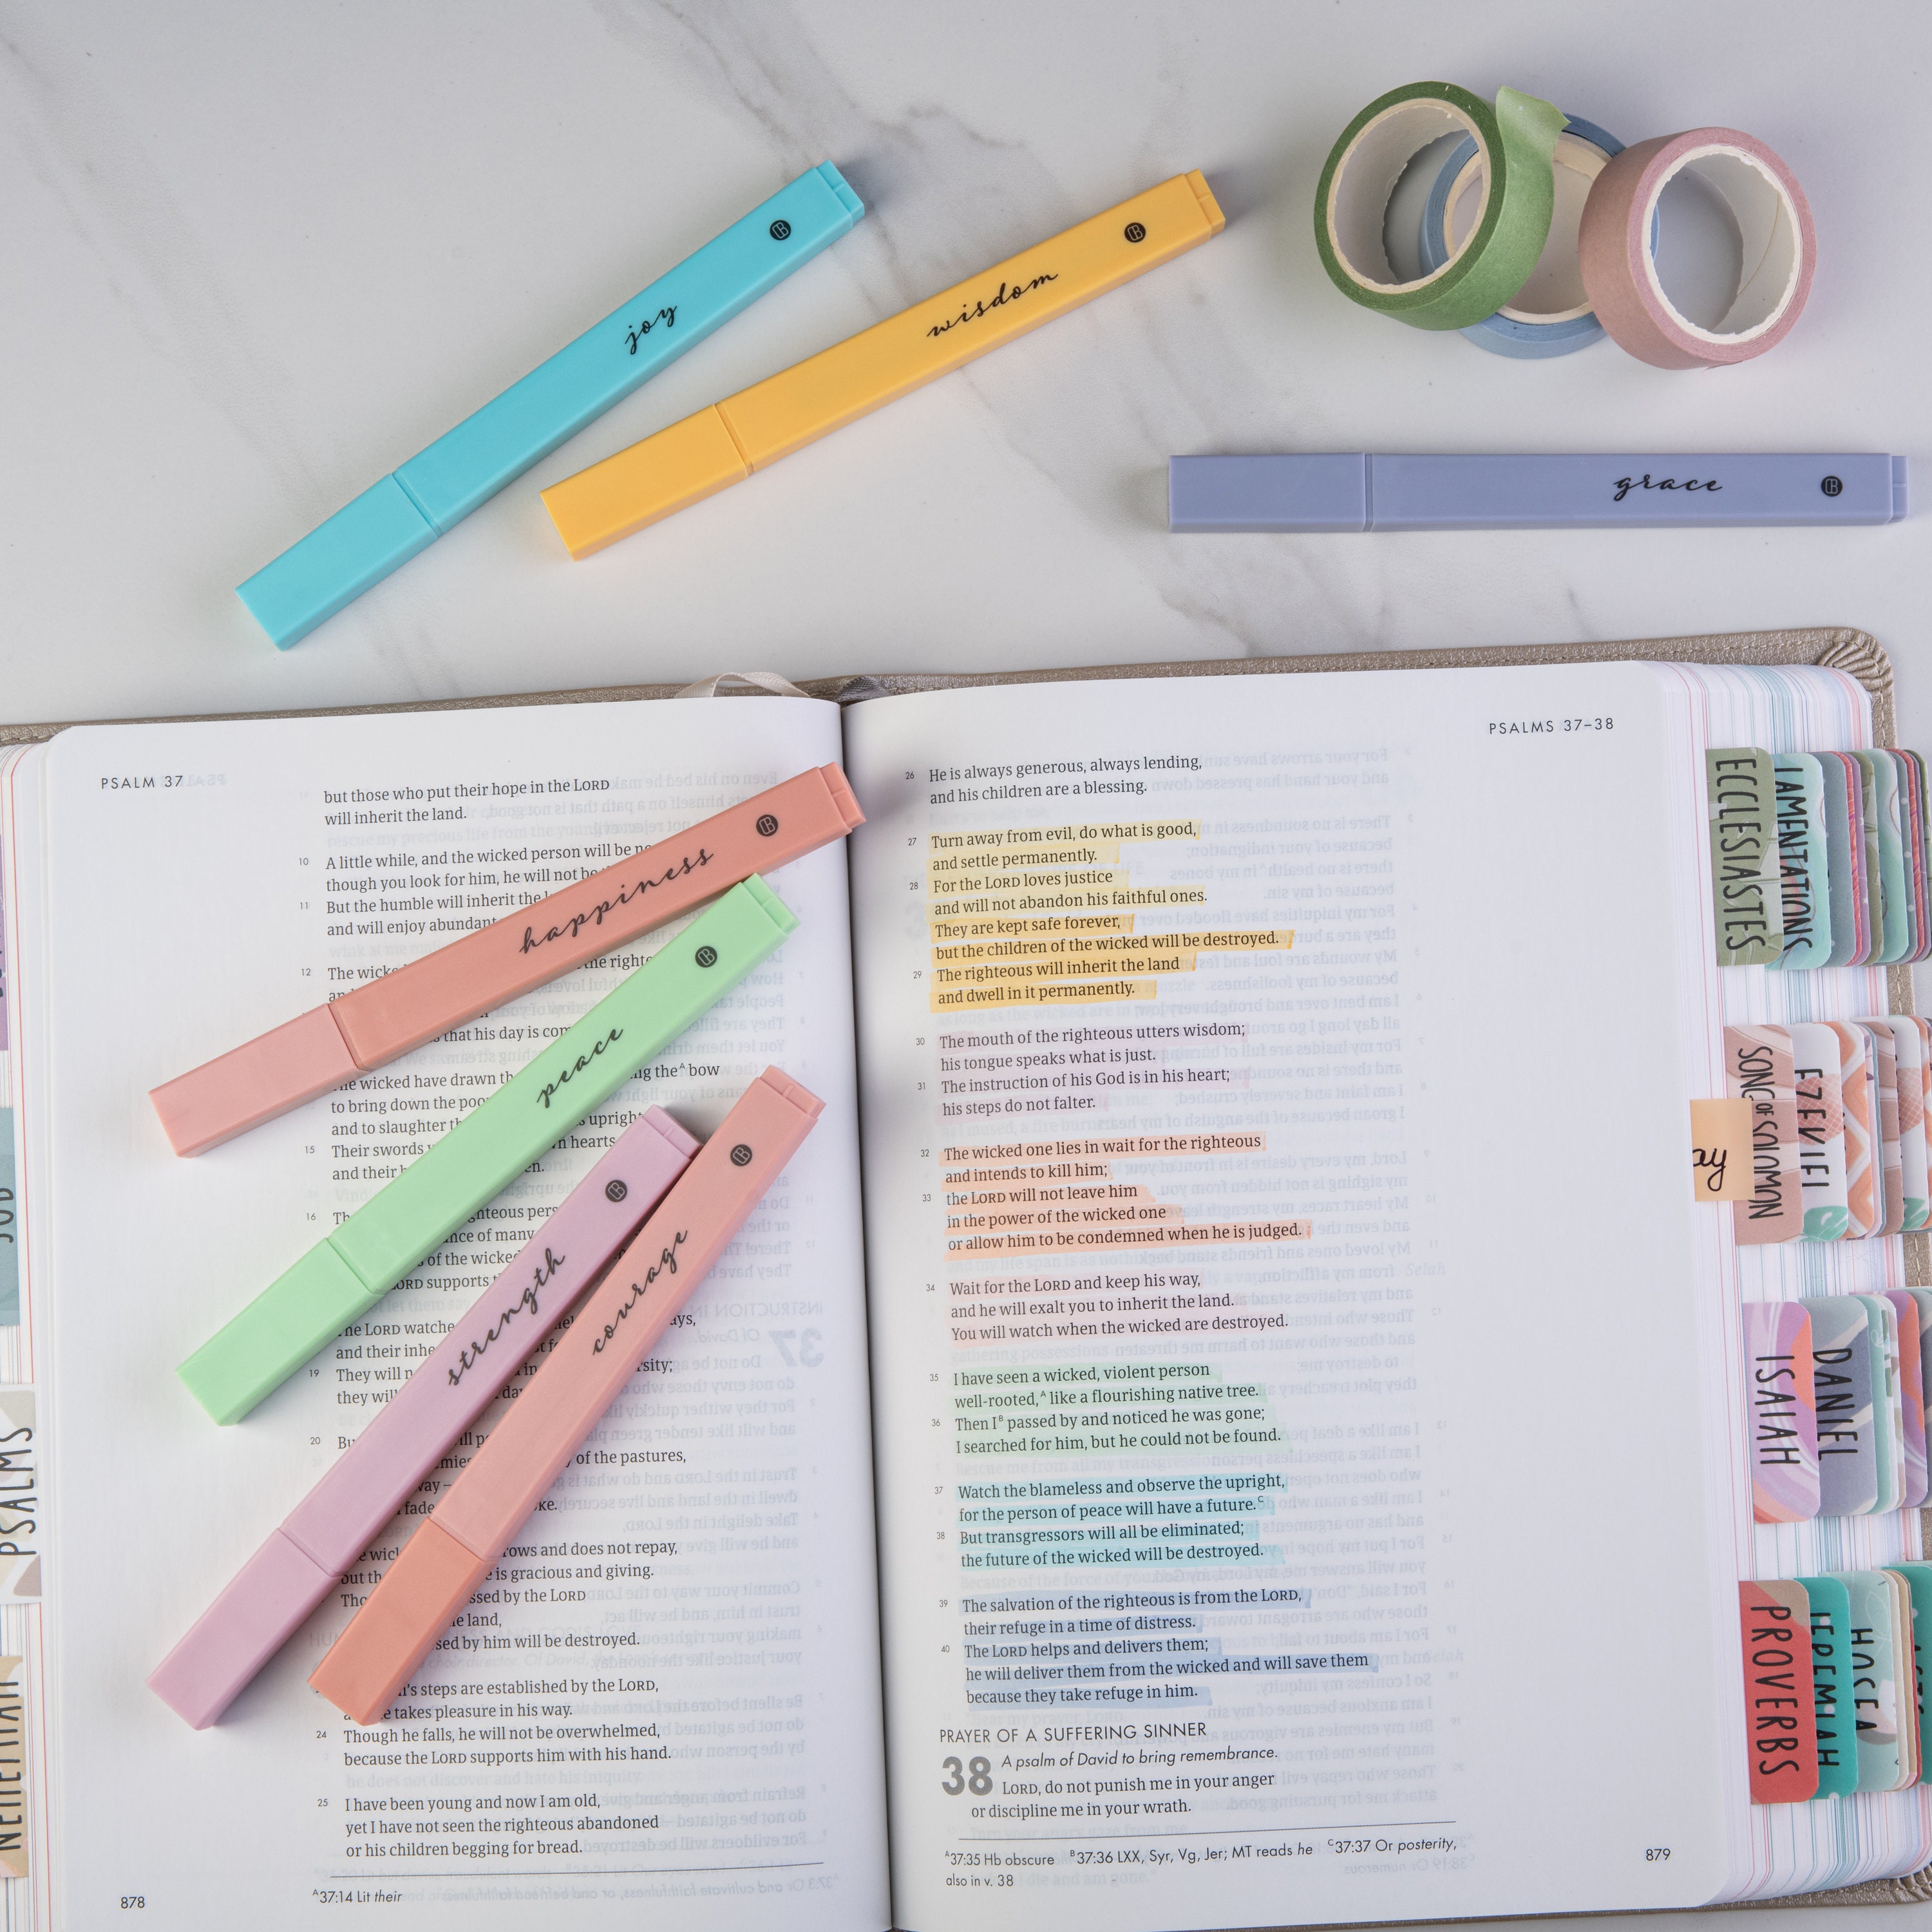 8 Dusty Bible Highlighters No Bleed or Smear, Bible Safe Gel Highlighters, Bible  Markers Pens, Dry Highlighters Set, Journaling Supplies 